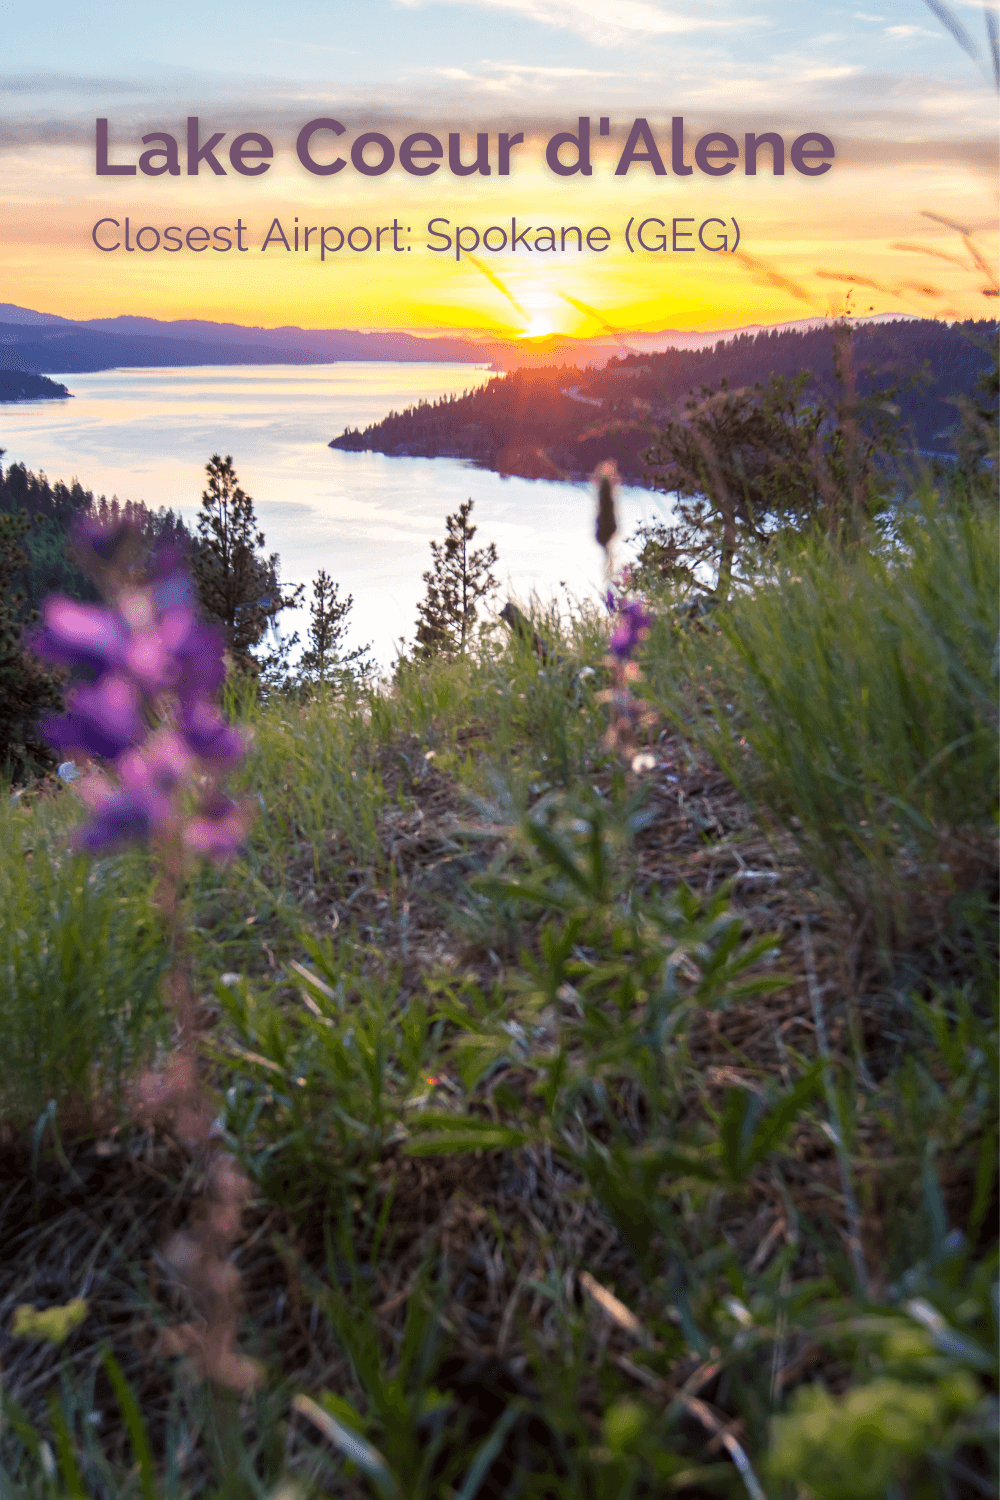 Lake Coeur d'Alene is beautiful at sunset and this shot shows the viewpoint from atop a forested mountain with the lake below winding around more distant forests.  